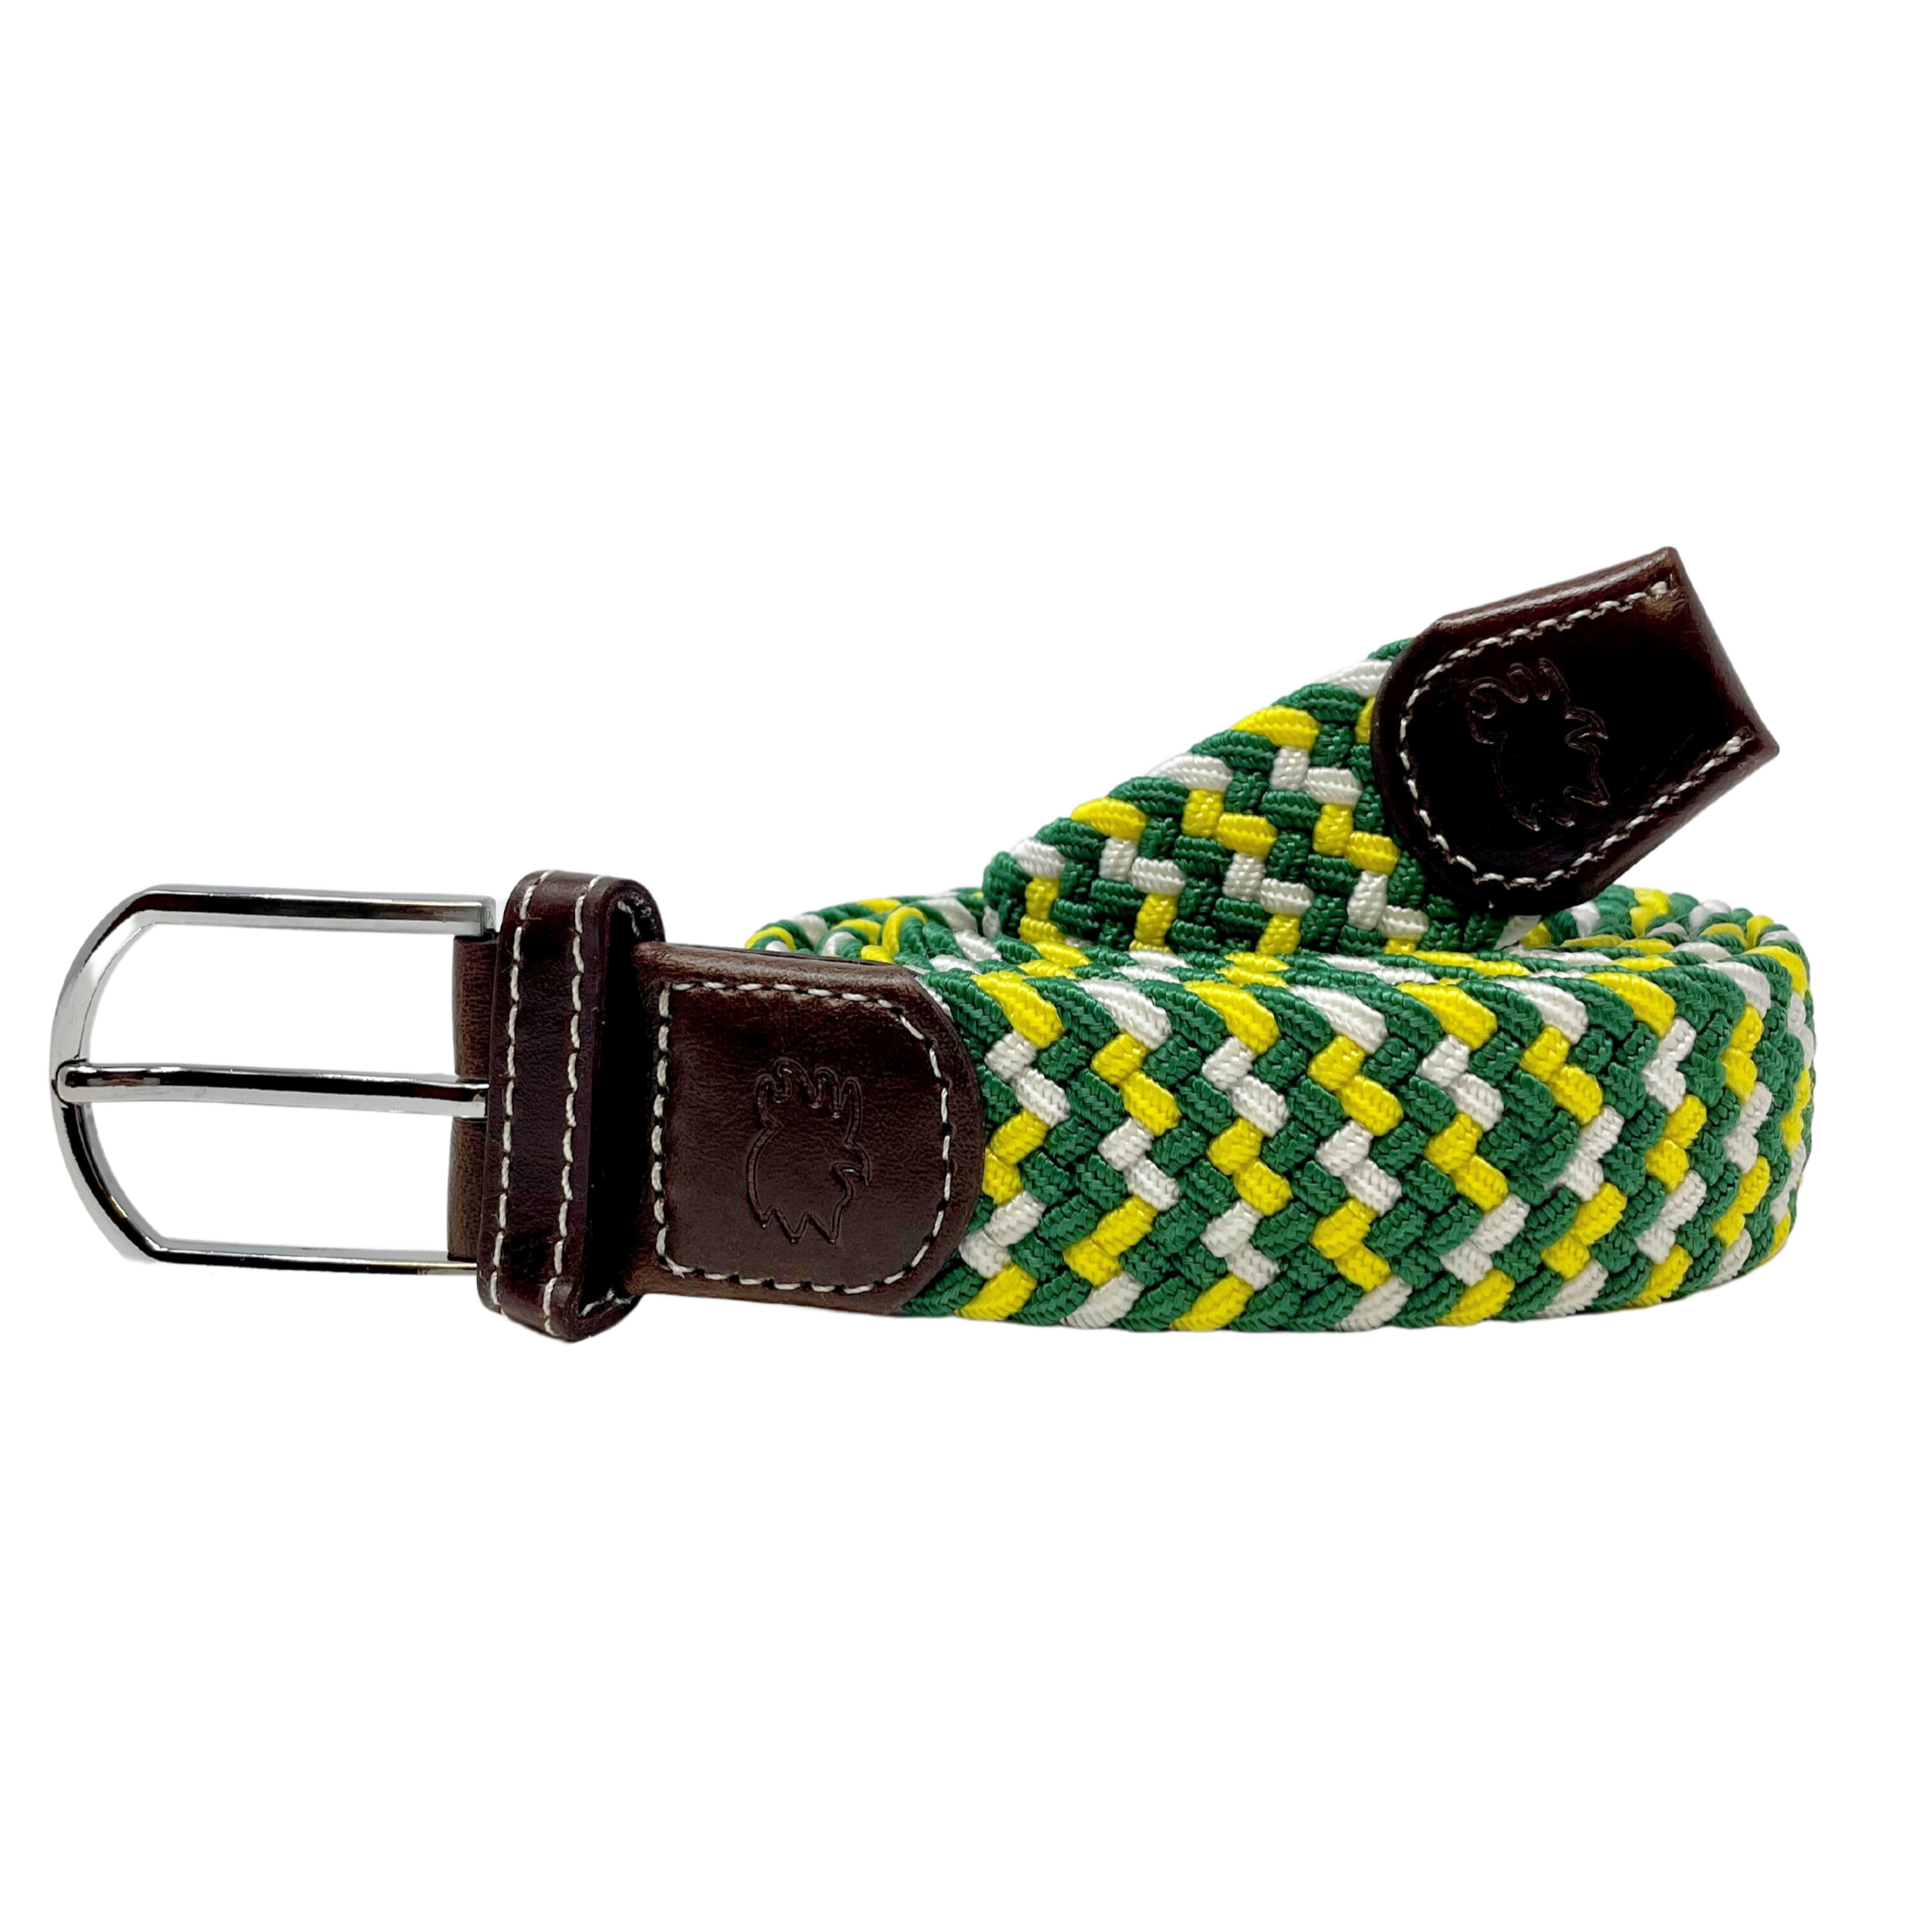 Roostas -The Patron Woven Elastic Stretch Belt